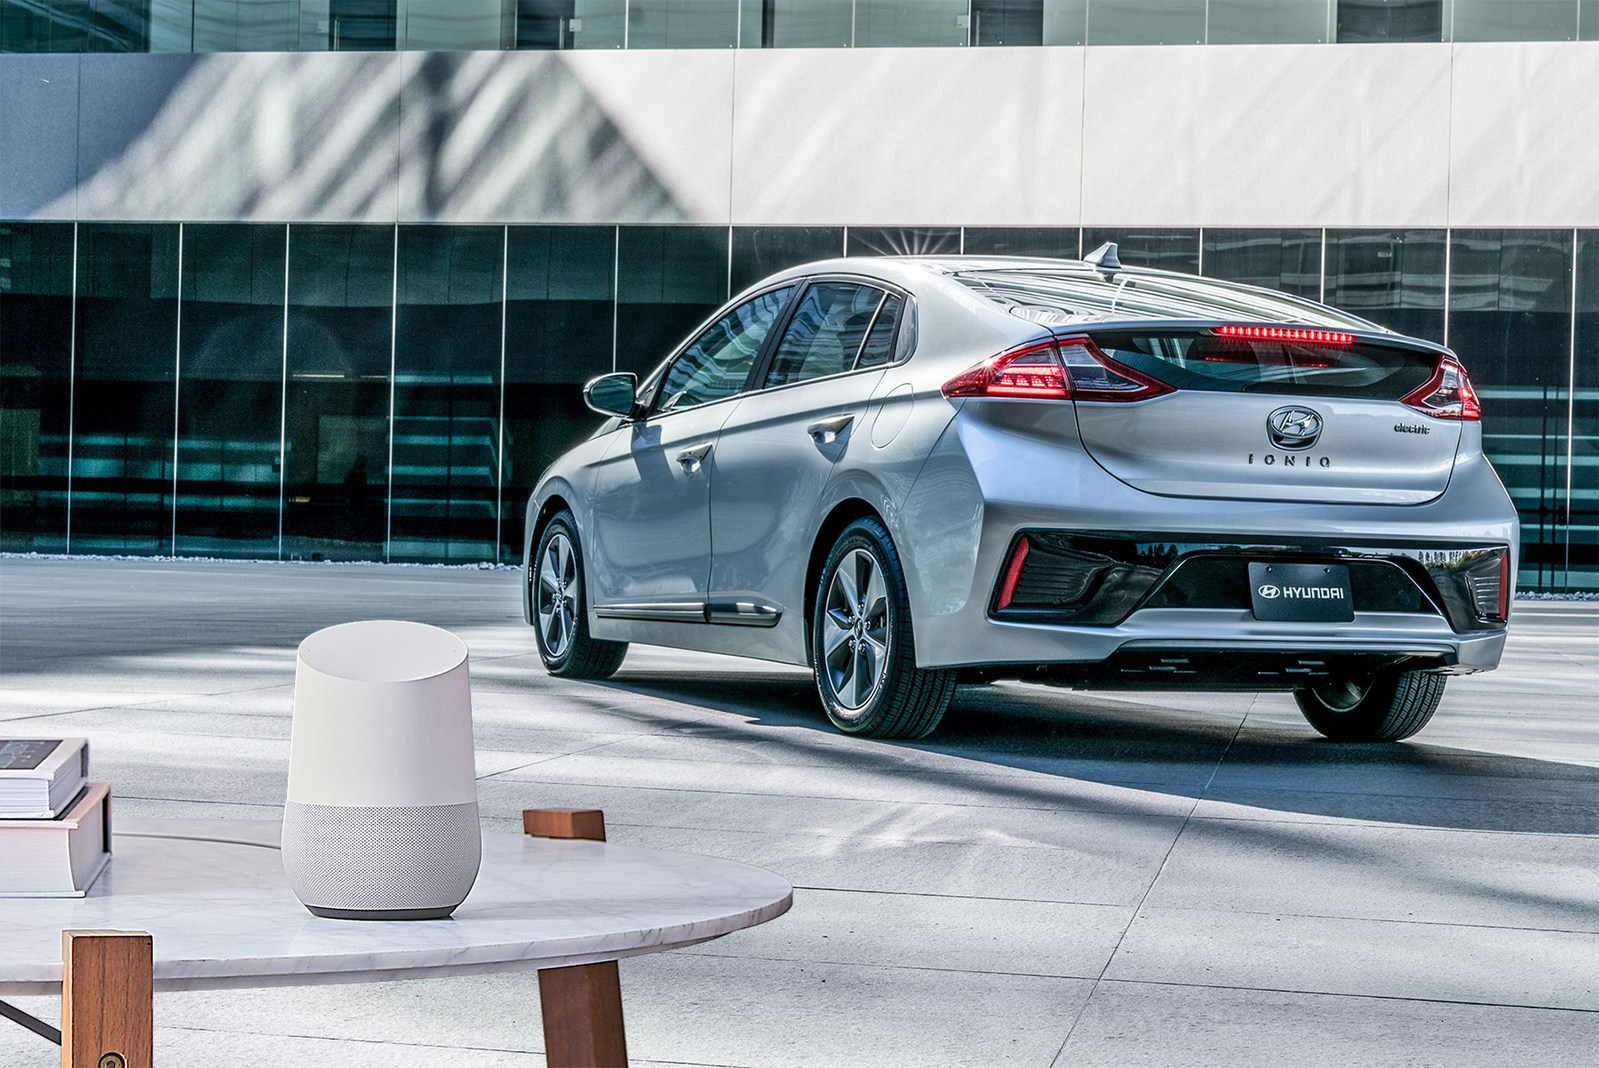 In an integration highlighting the increasing connection between cars and the home, Hyundai is demonstrating compatibility with the company's Blue Link Agent for the Google Assistant. The integration, which Hyundai will be demonstrating at Pepcom's Digital Experience prior to the Consumer Electronics Show (CES(R)) on January 4, allows control of various functions of a Hyundai vehicle with simple voice commands.